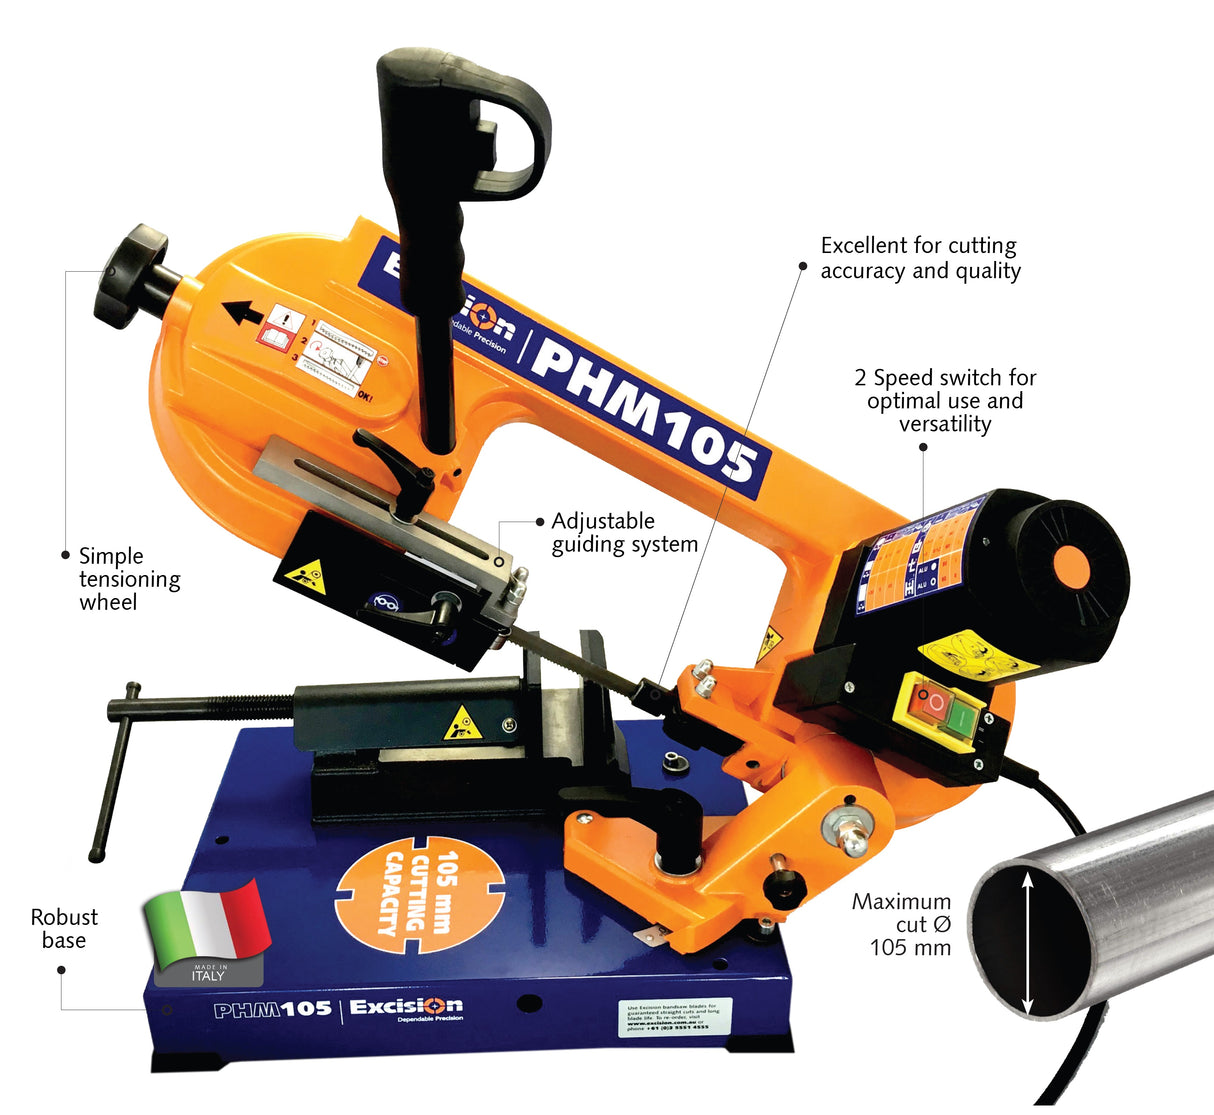 PHM 105 Portable Bandsaw